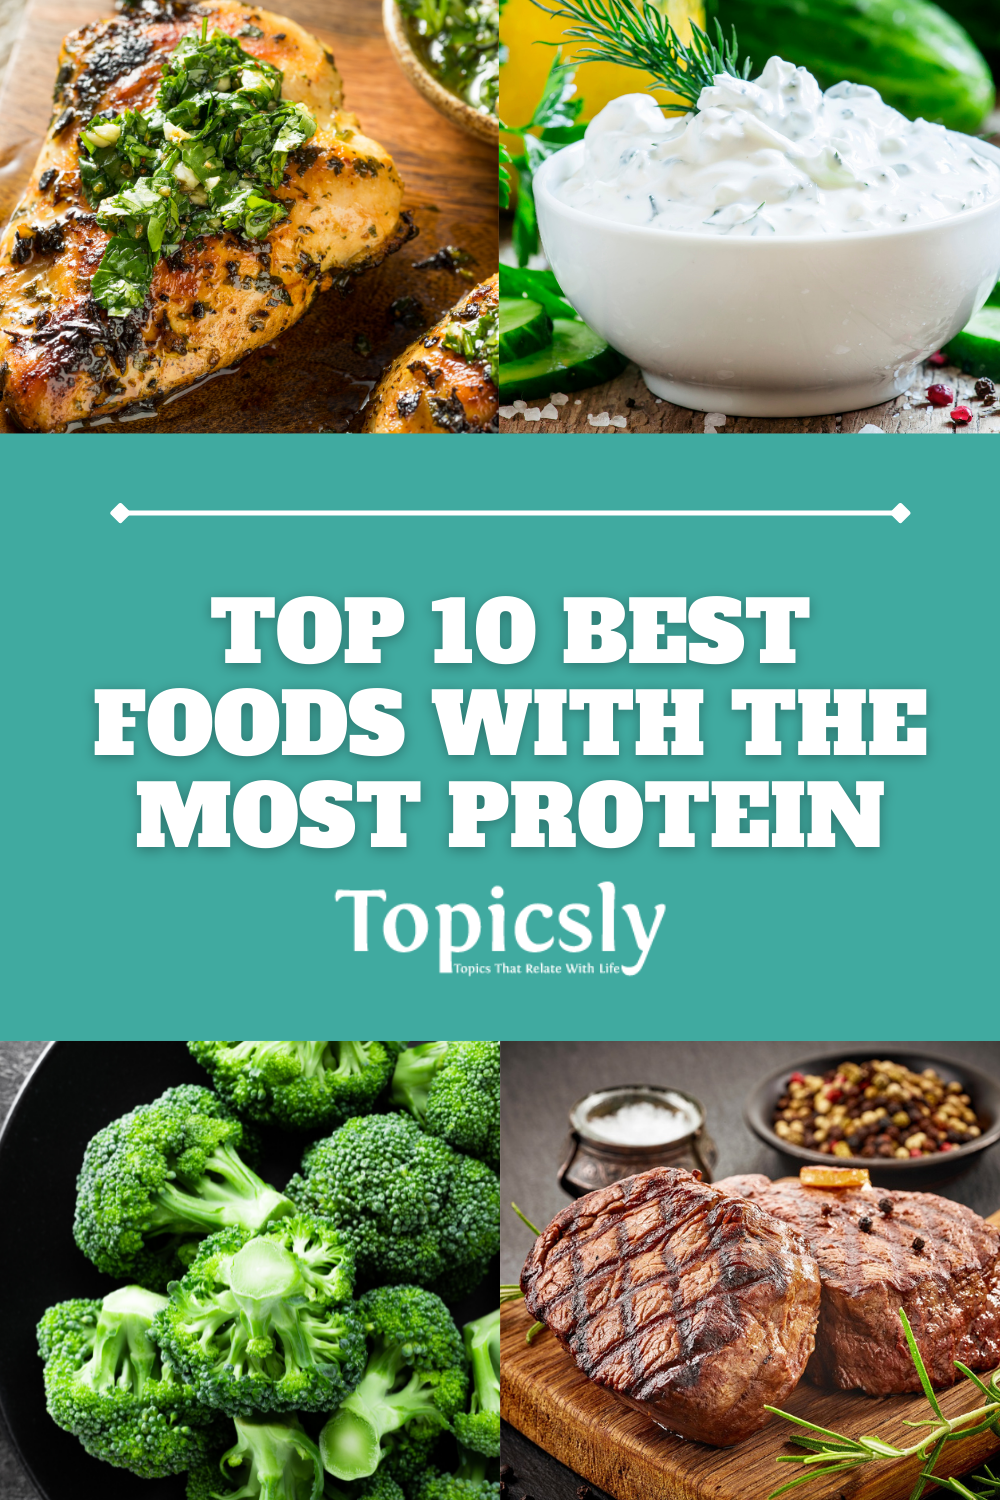 Top 10 Healthy Foods with the Most Protein for Weight Loss